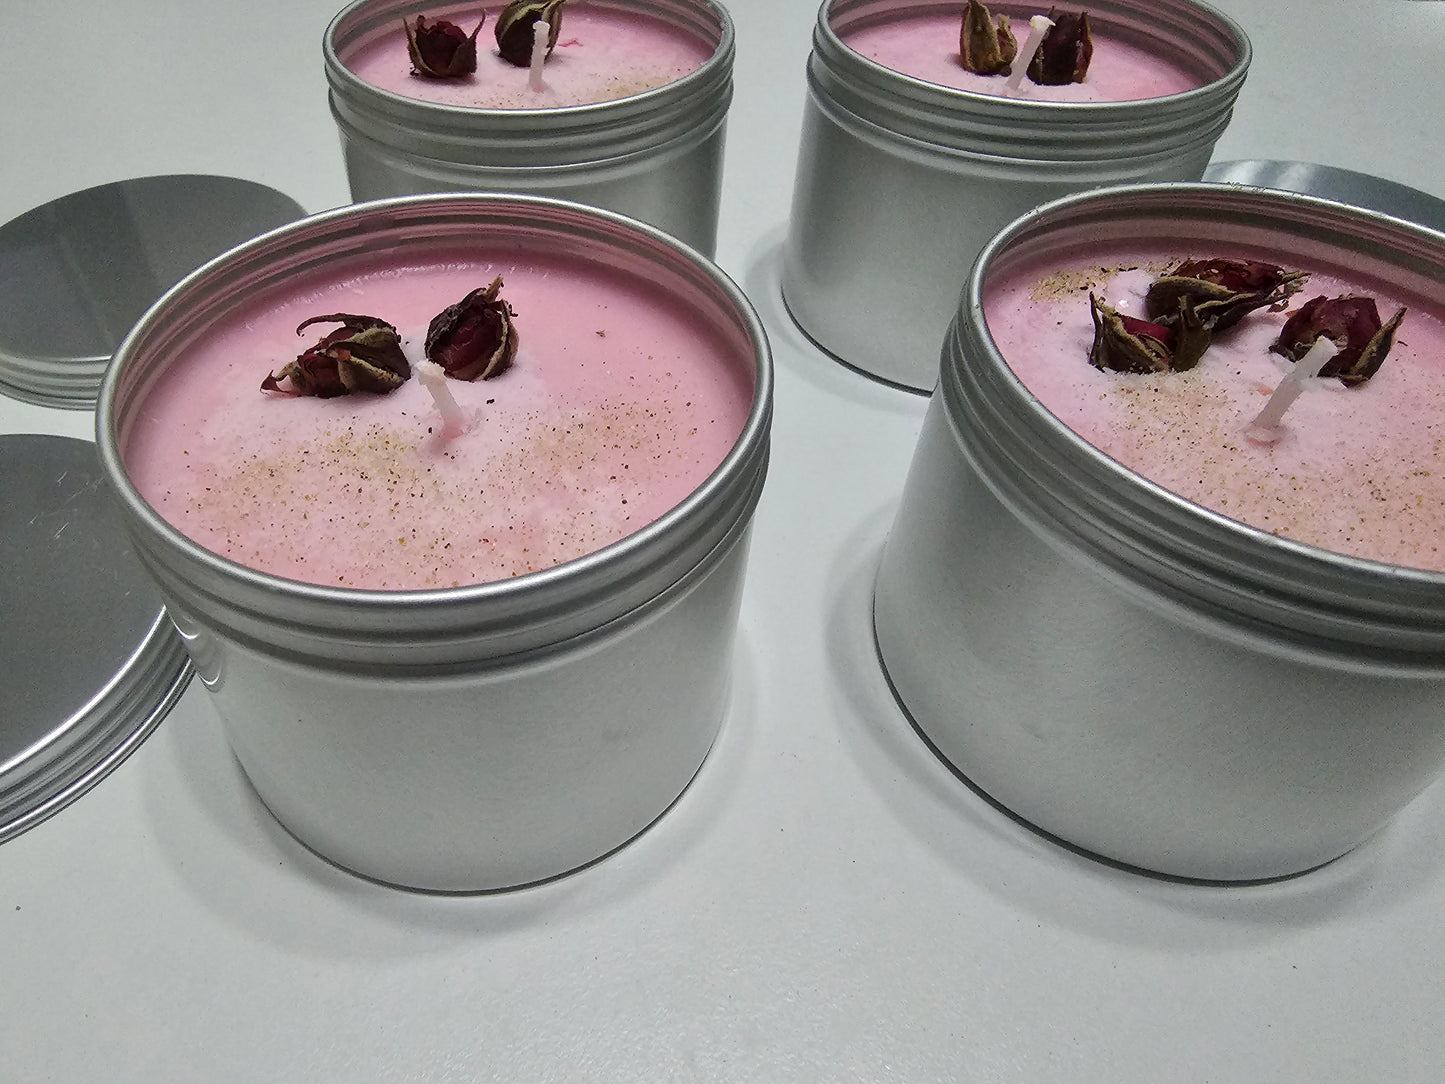 Boho Beach scented candle - My final rose